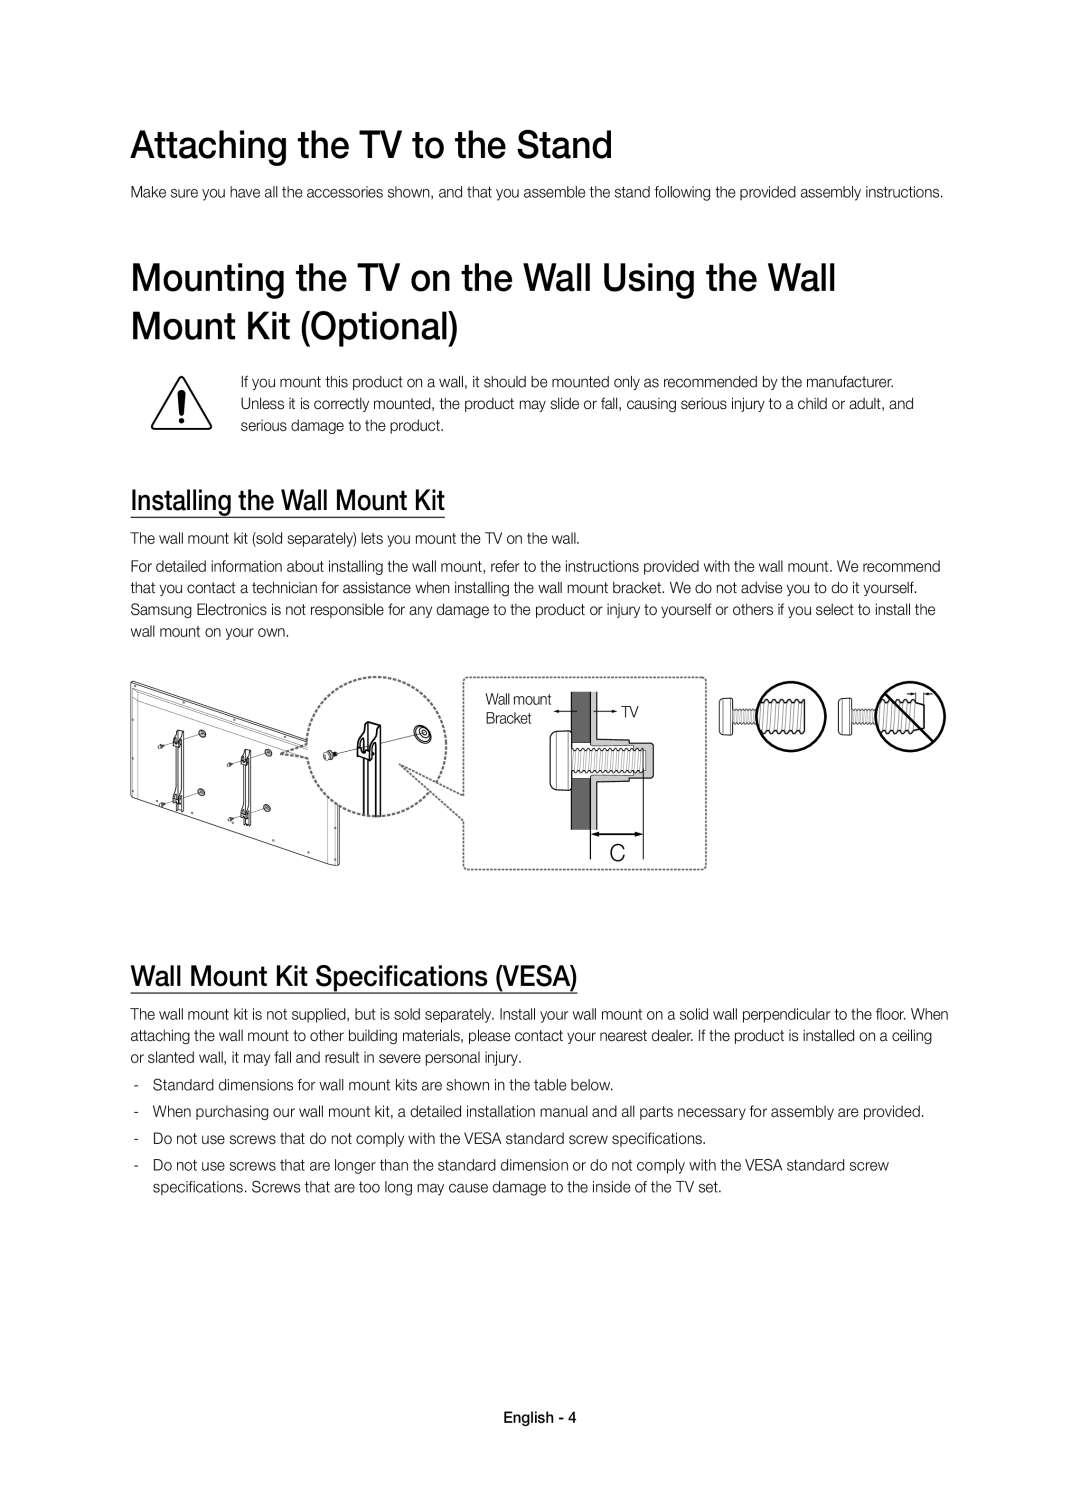 Samsung UE40H6410SSXXC manual Attaching the TV to the Stand, Mounting the TV on the Wall Using the Wall Mount Kit Optional 